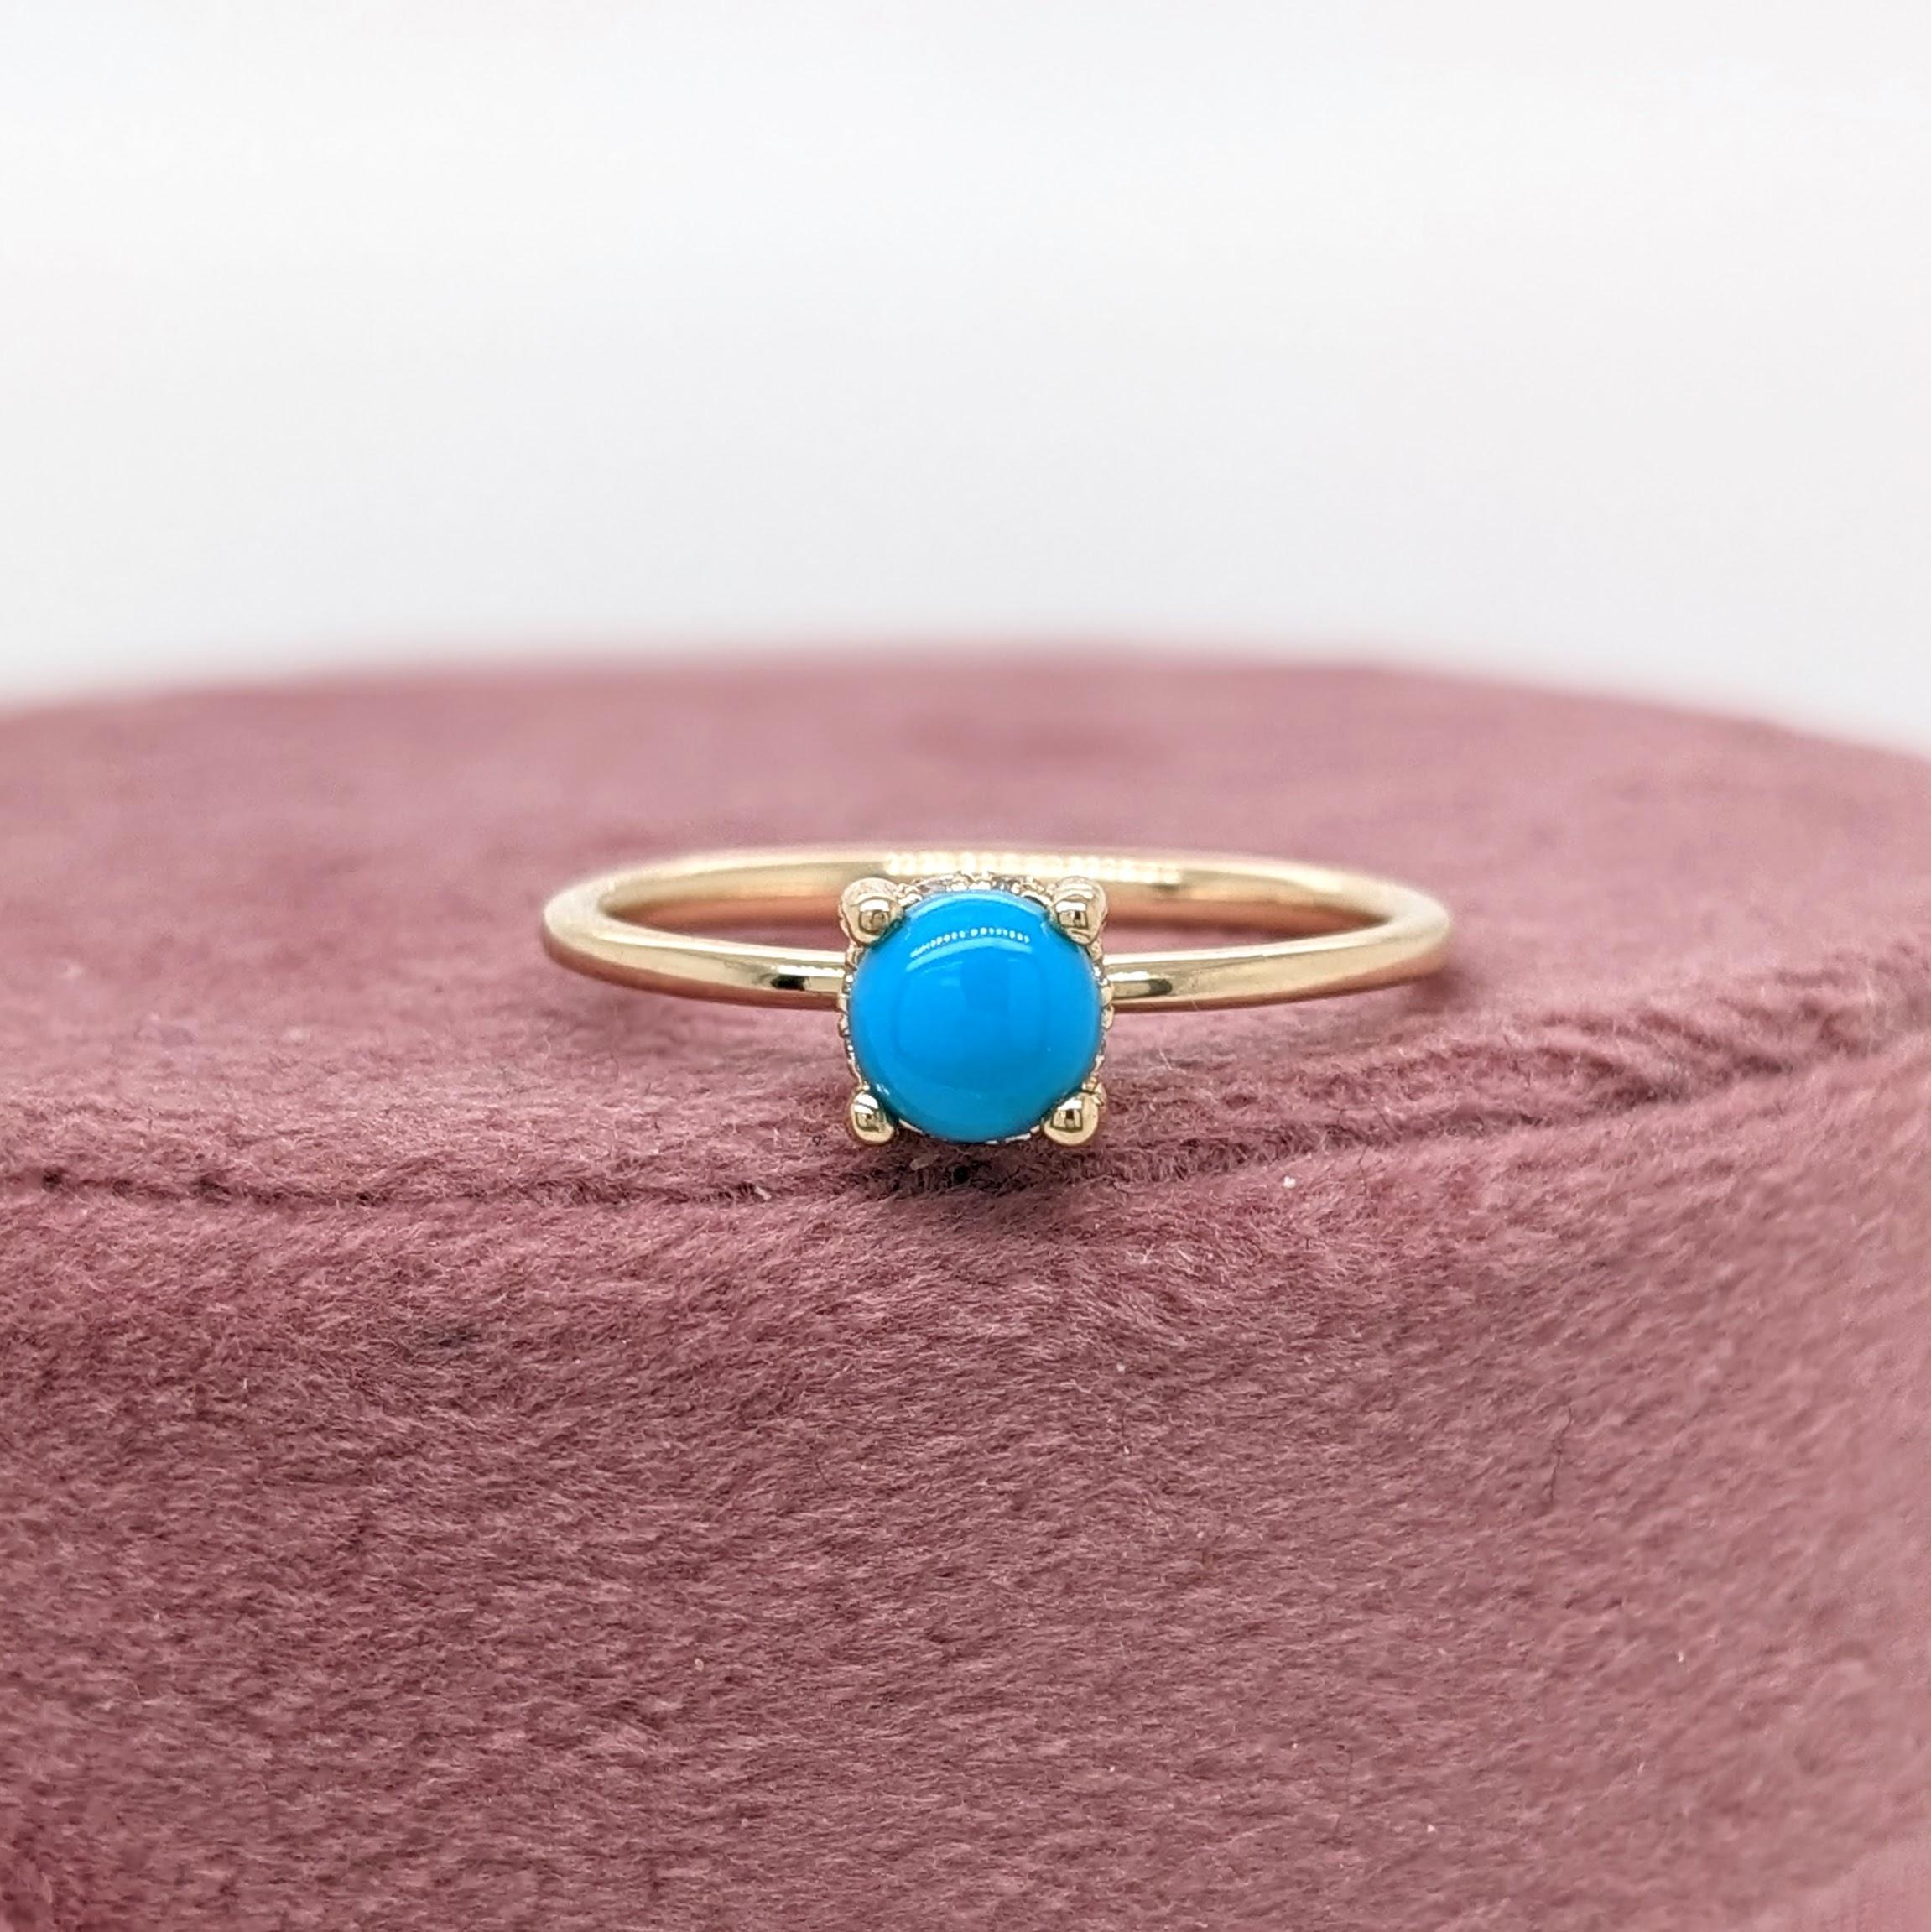 Round Cut Turquoise Ring w Earth Mined Diamonds in Solid 14K Yellow Gold Round 5mm For Sale